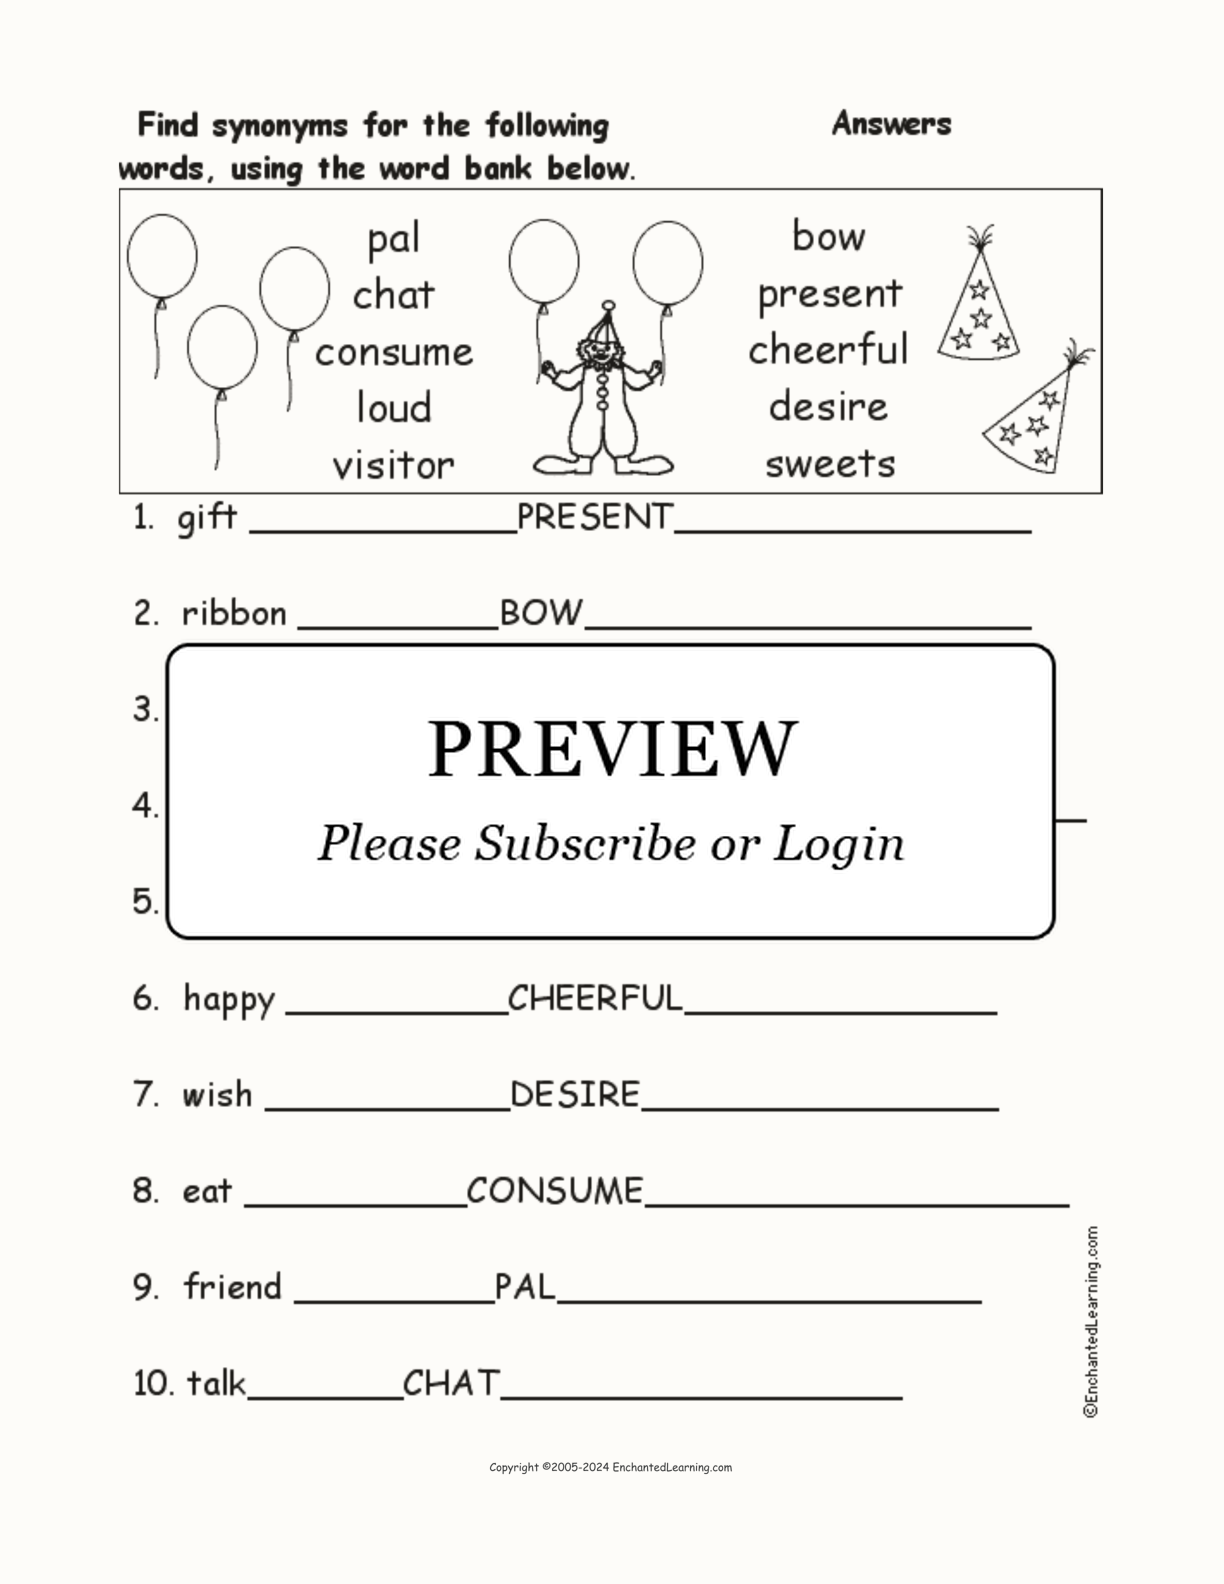 Birthday Synonyms interactive worksheet page 2